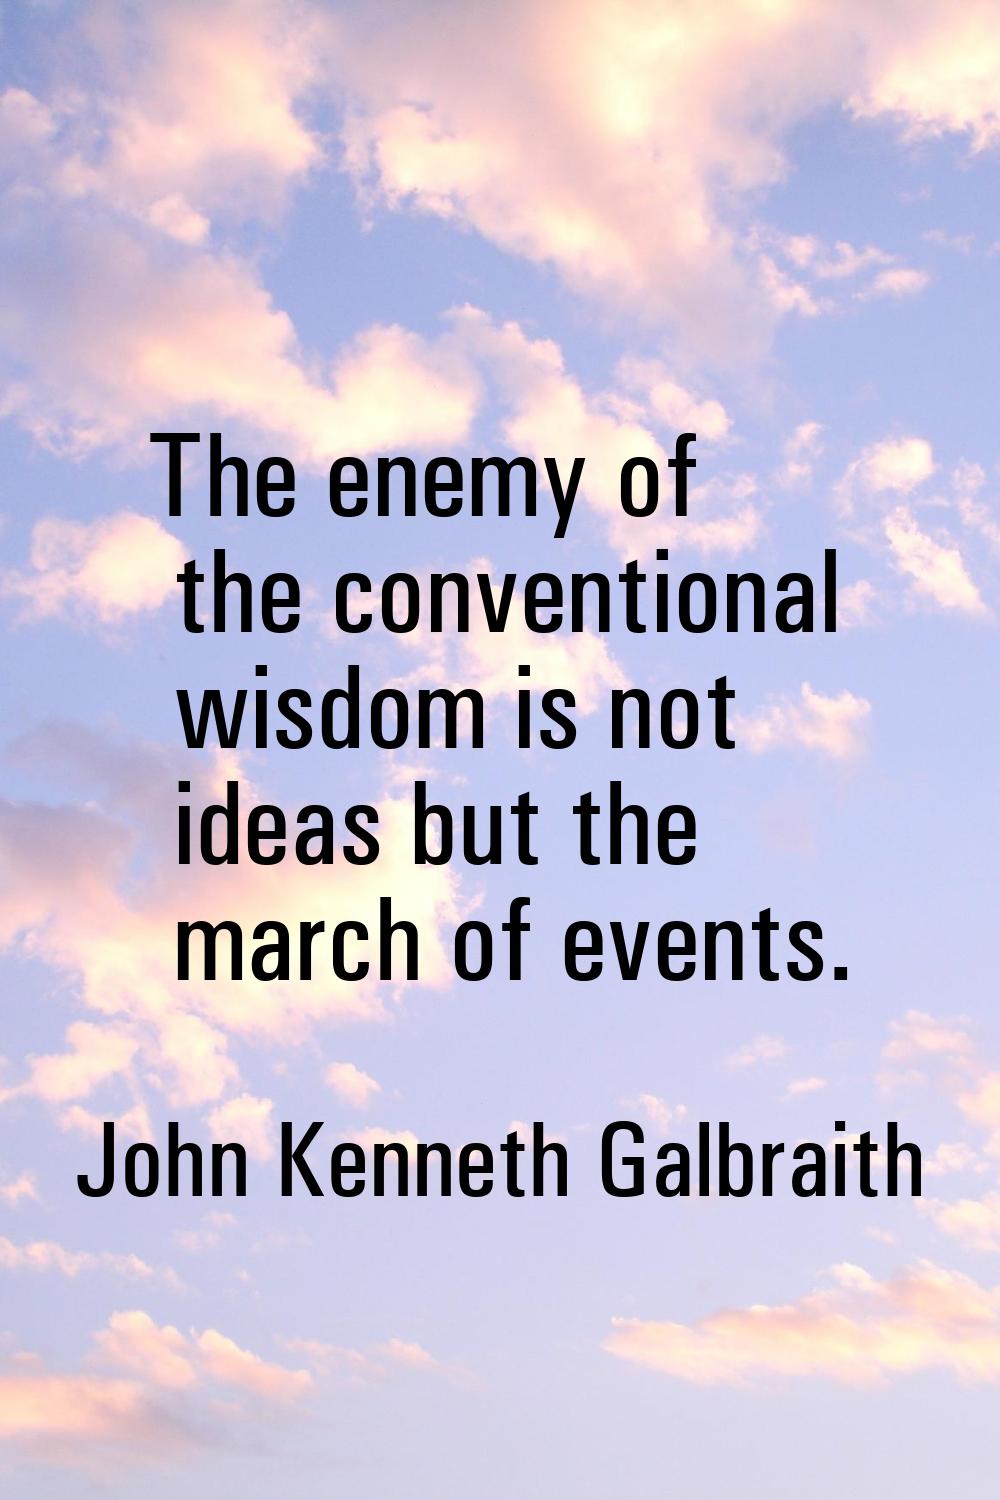 The enemy of the conventional wisdom is not ideas but the march of events.